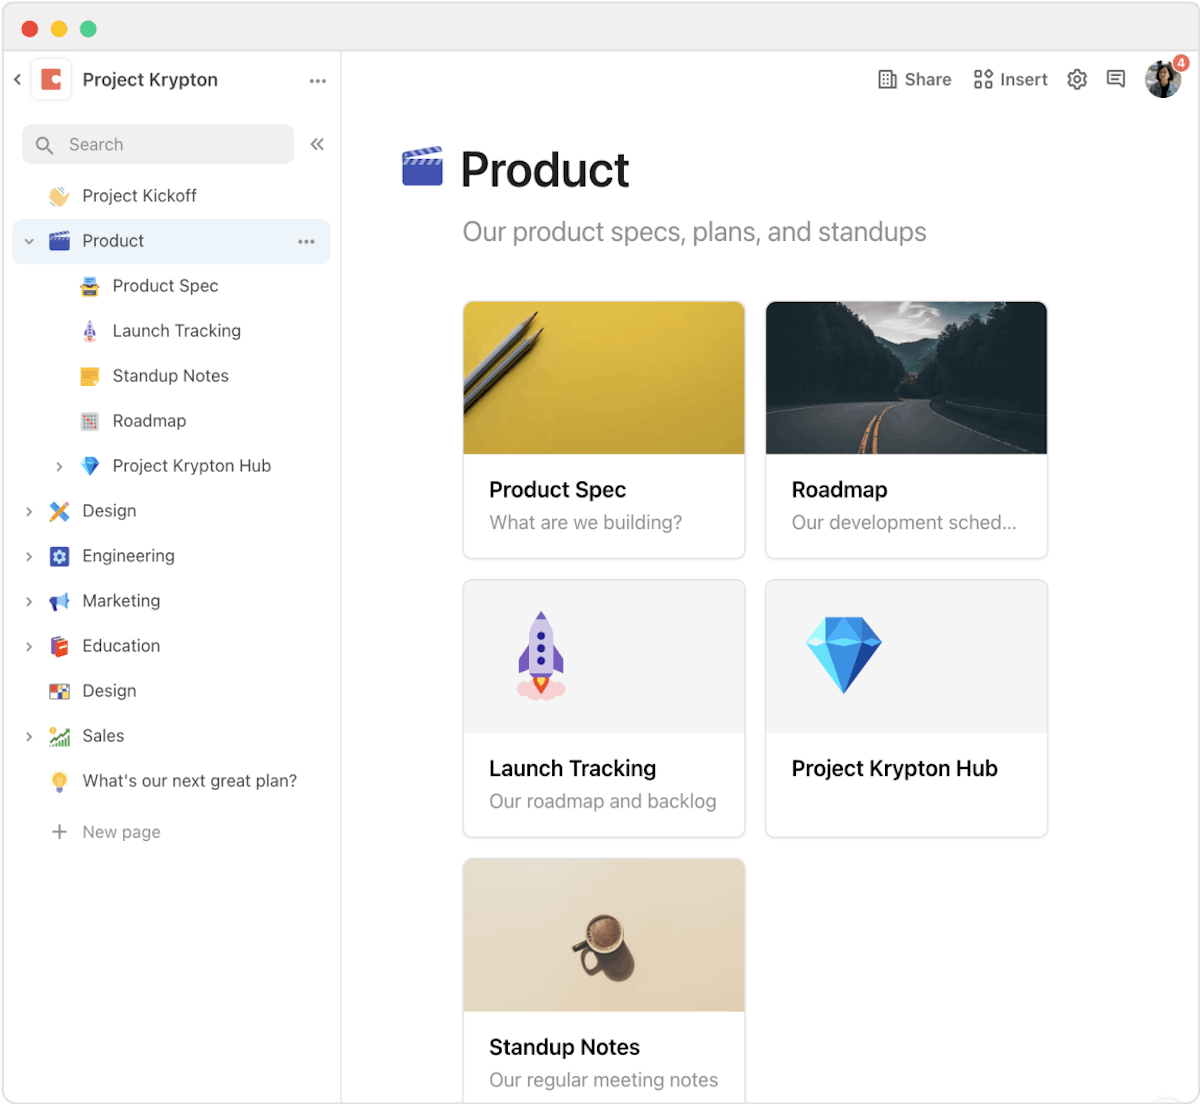 Screenshot of a product launch hub built in Coda - Coda brings all your information into one place